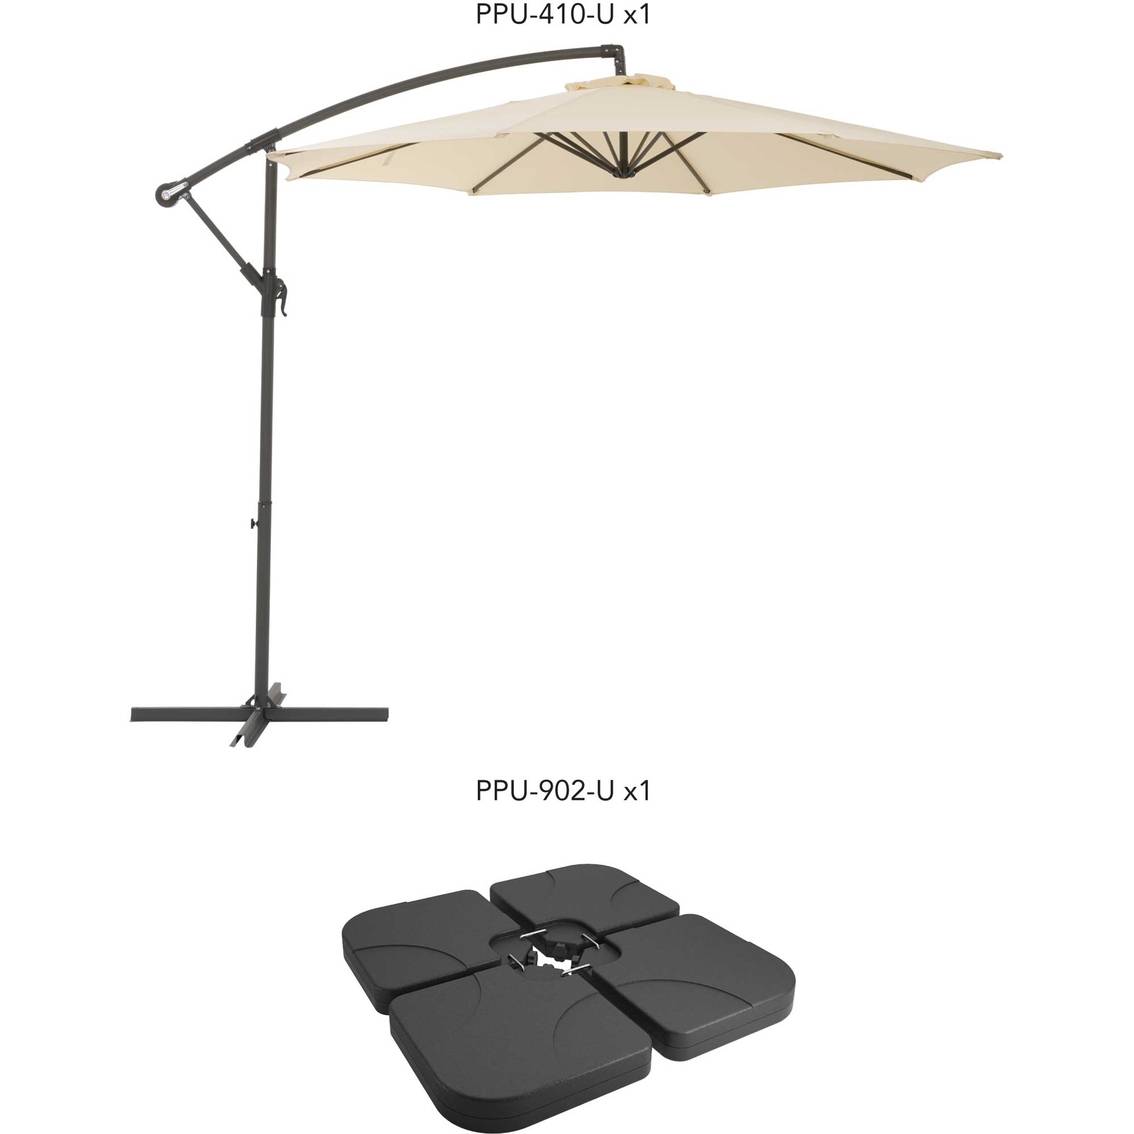 CorLiving PPU-410-Z1 9.5 ft. UV Resistant Offset Patio Umbrella and Base - Image 2 of 4